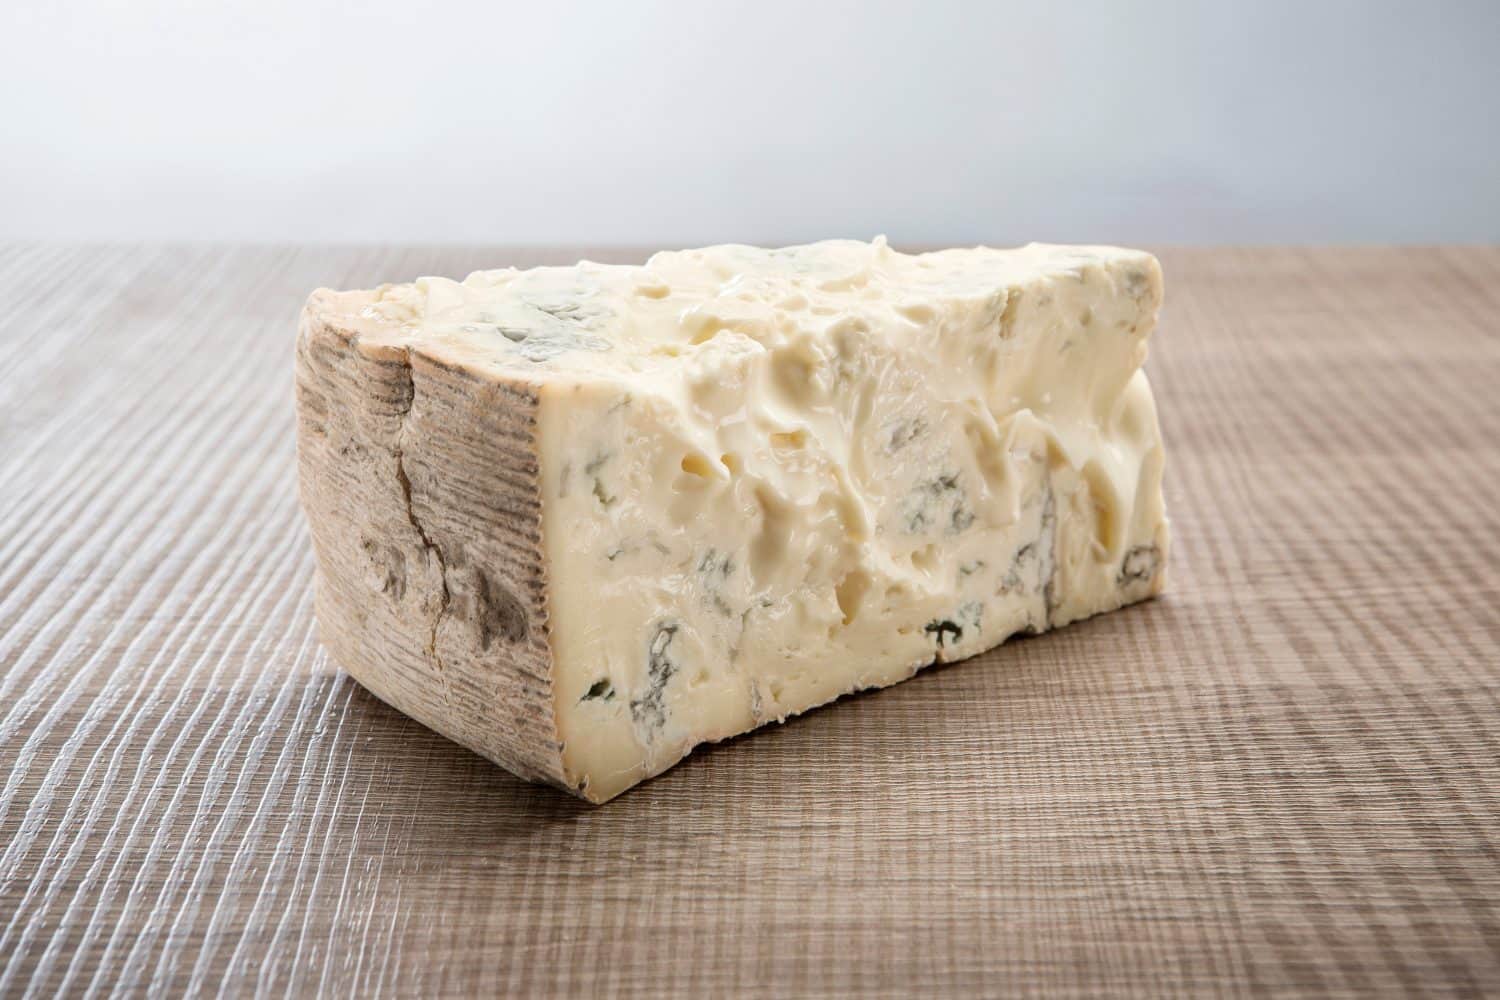 Gorgonzola Italian traditional aged blue cheese on wooden background